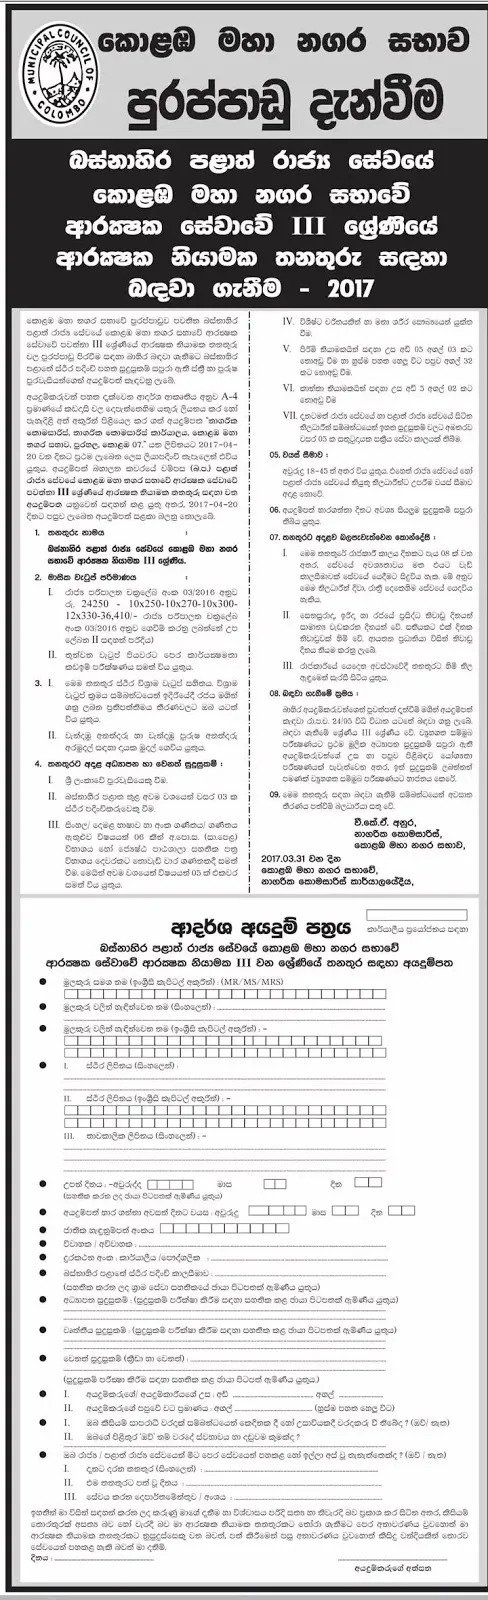 Security Guard Jobs Vacancy in Colombo Municipal Council